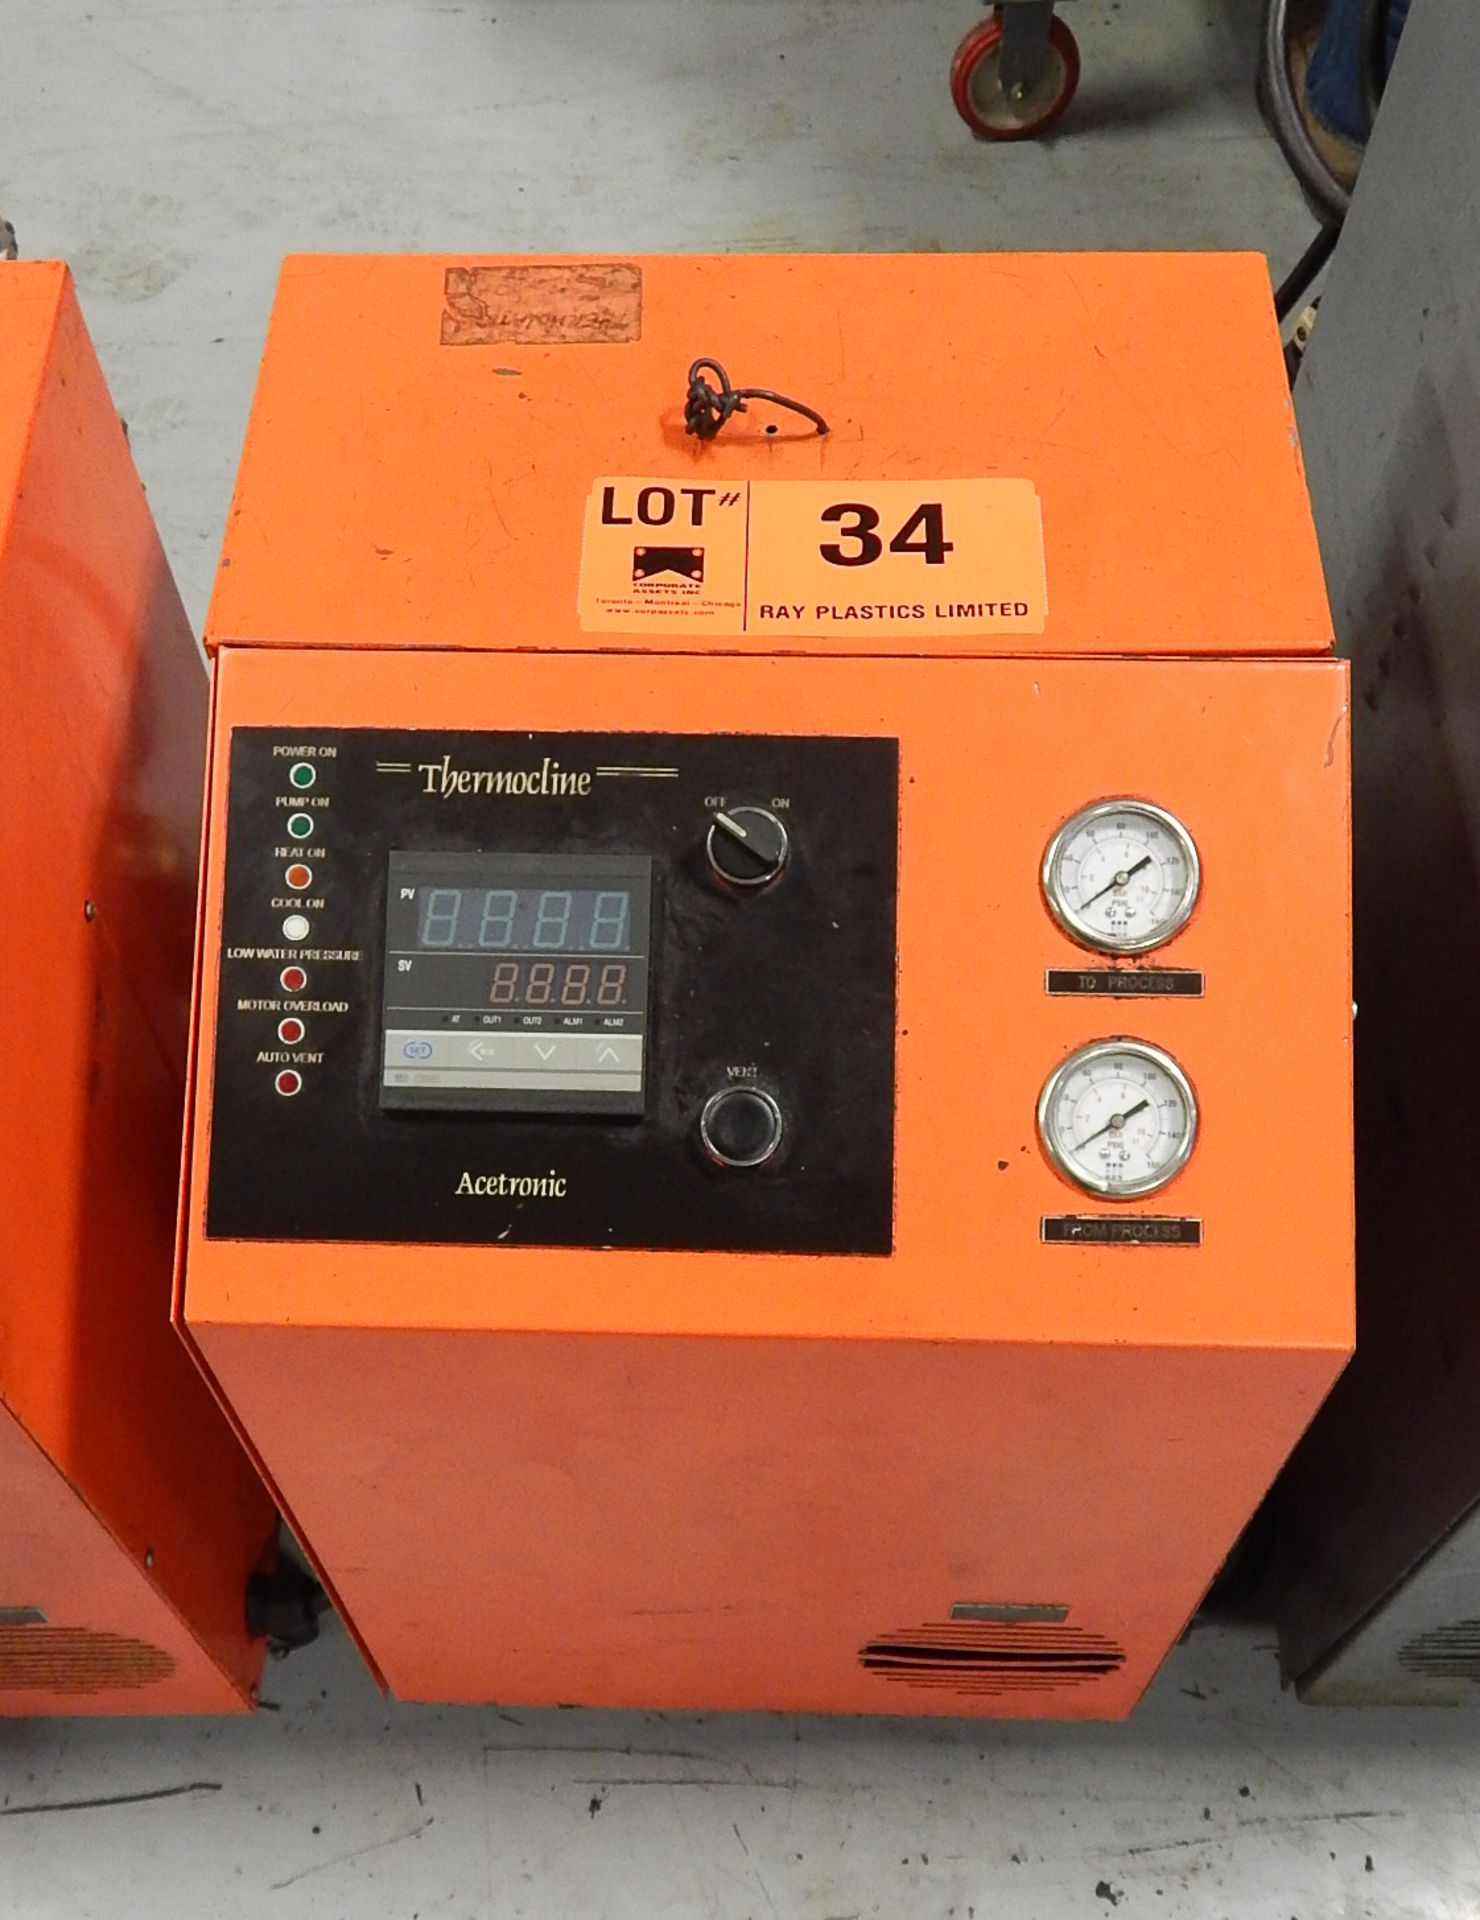 ACETRONIC THERMO-CLINE THERMOLATOR WITH PLC CONTROL